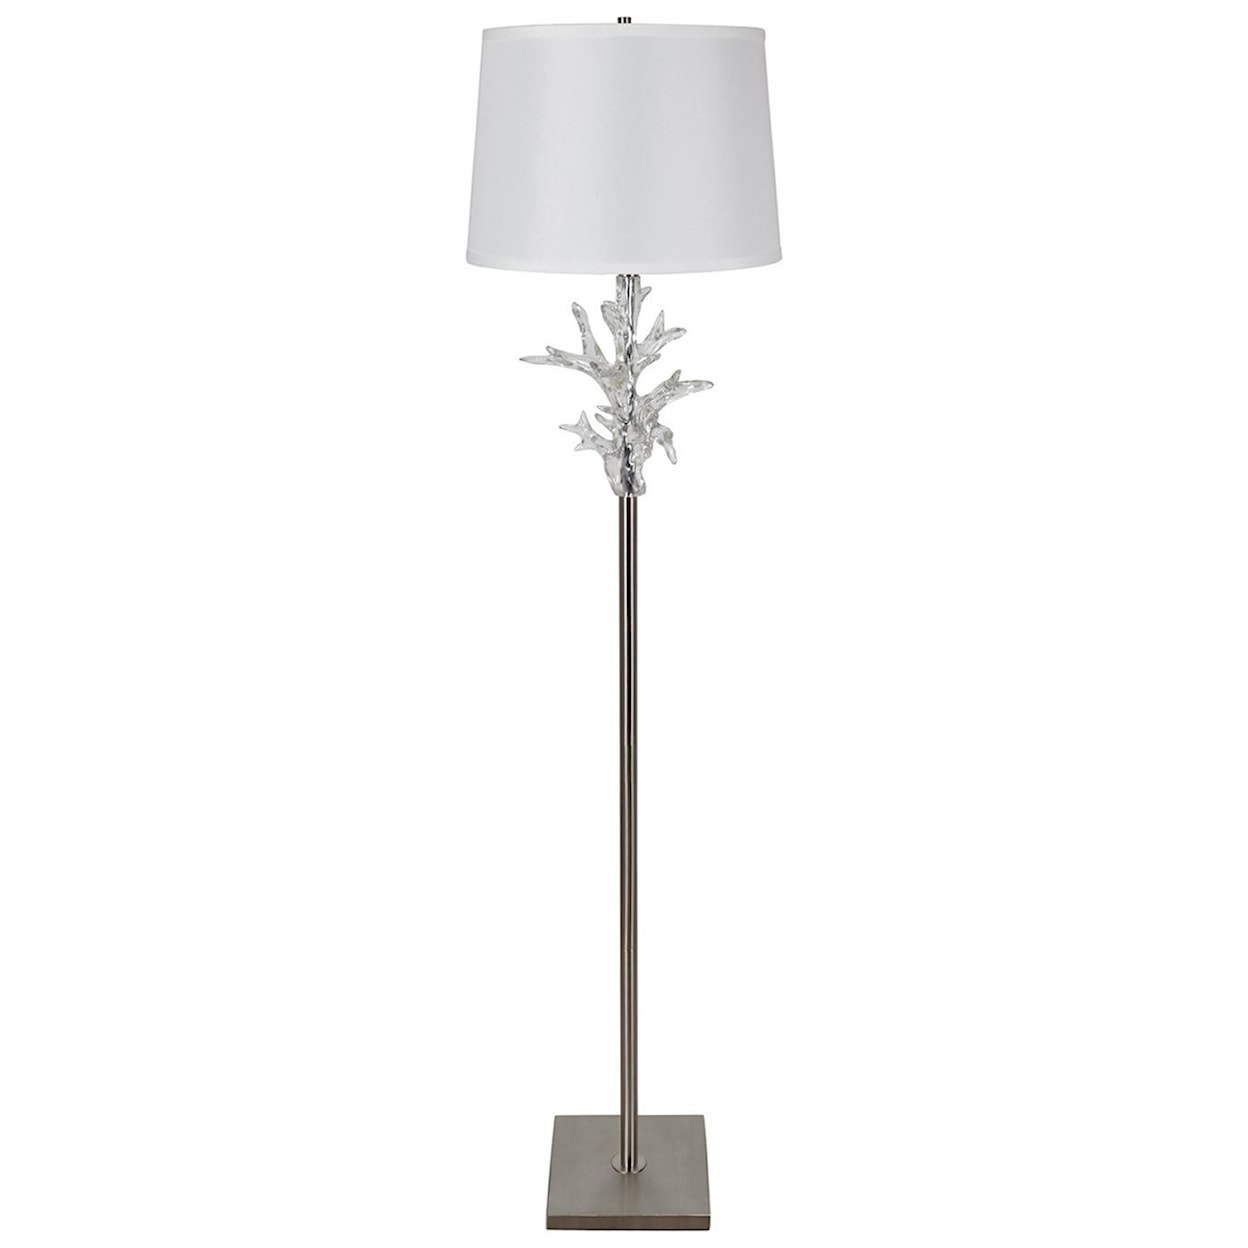 Crestview Collection Lighting Crystal Coral Floor Lamp